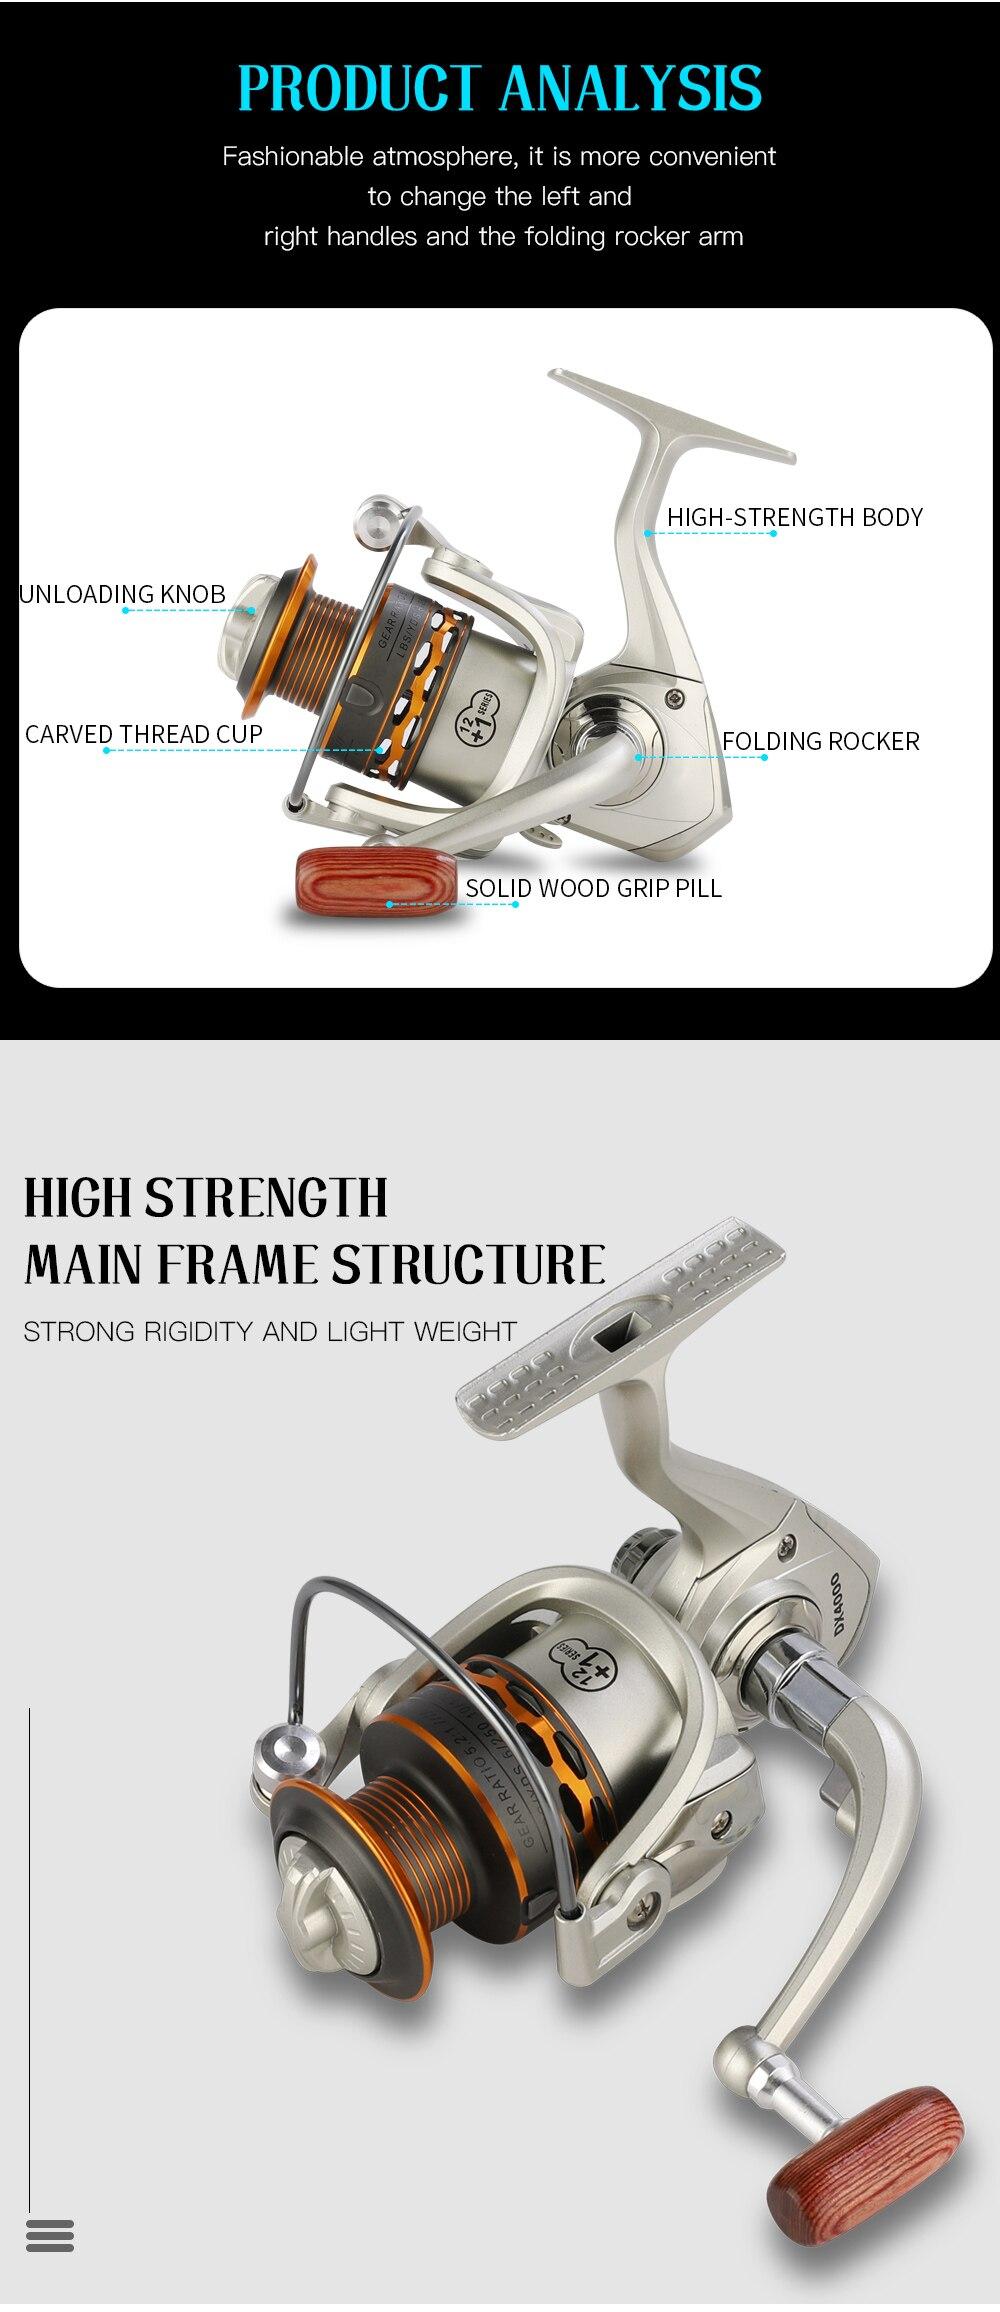 Double Spool Fishing coil Wooden handshake 12+ 1BB Spinning Fishing Reel Professional Metal Left/Right Hand Fishing Reel Wheels